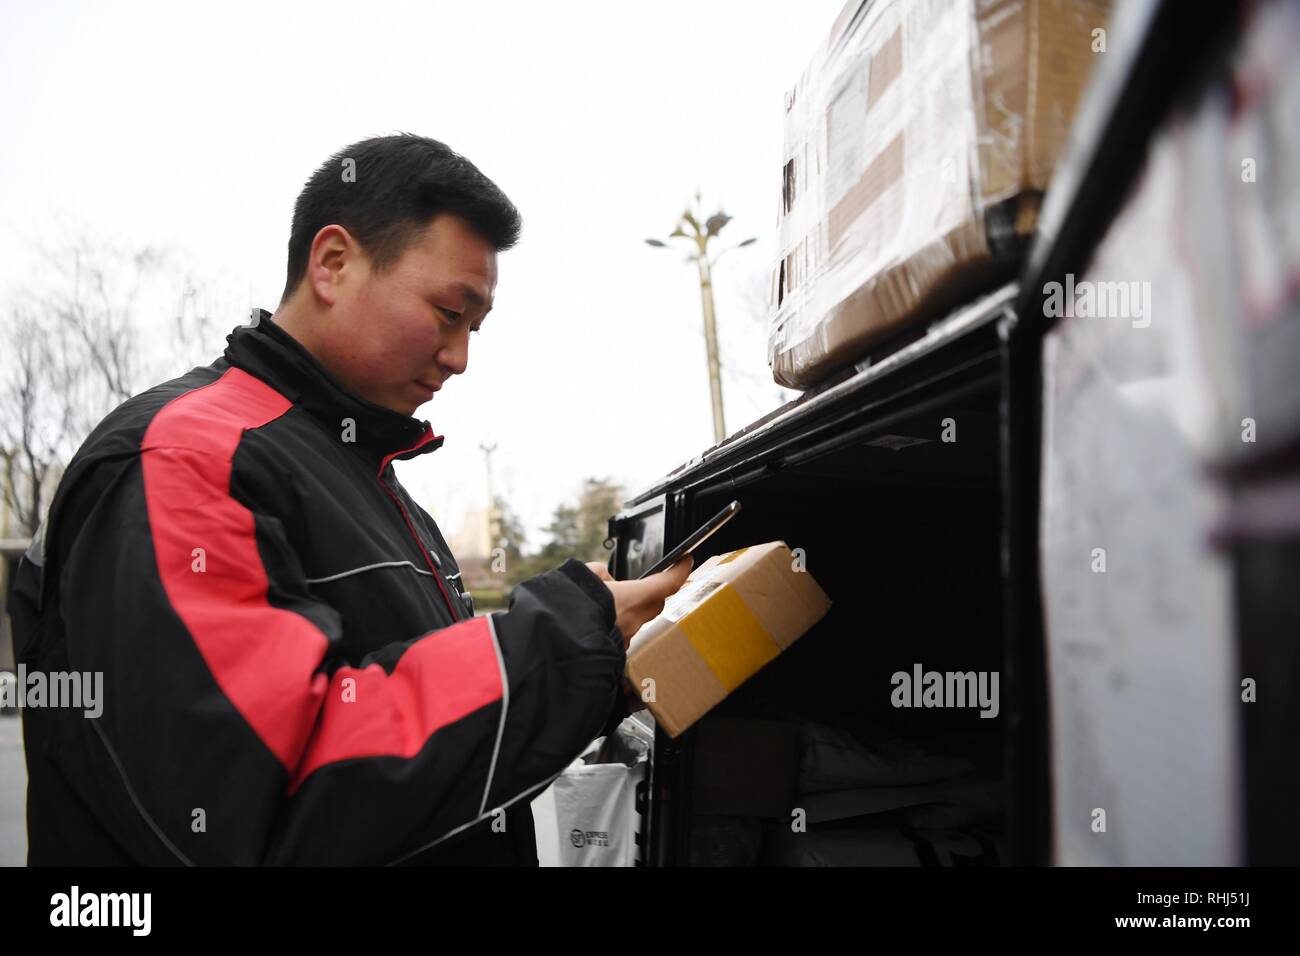 Xi'an, China's Shaanxi Province. 3rd Feb, 2019. Deliveryman Luo Feilong calls customers to get their packages in Xi'an, capital of northwest China's Shaanxi Province, Feb. 3, 2019. Luo Feilong, a 31-year-old deliveryman from Shaanxi Province, has been delivering packages in a community of Xi'an for four years. Luo applied for being on duty during this year's Spring Festival holiday so that other deliverymen from outside the province can return to their hometowns for family gatherings. Credit: Zhang Bowen/Xinhua/Alamy Live News Stock Photo